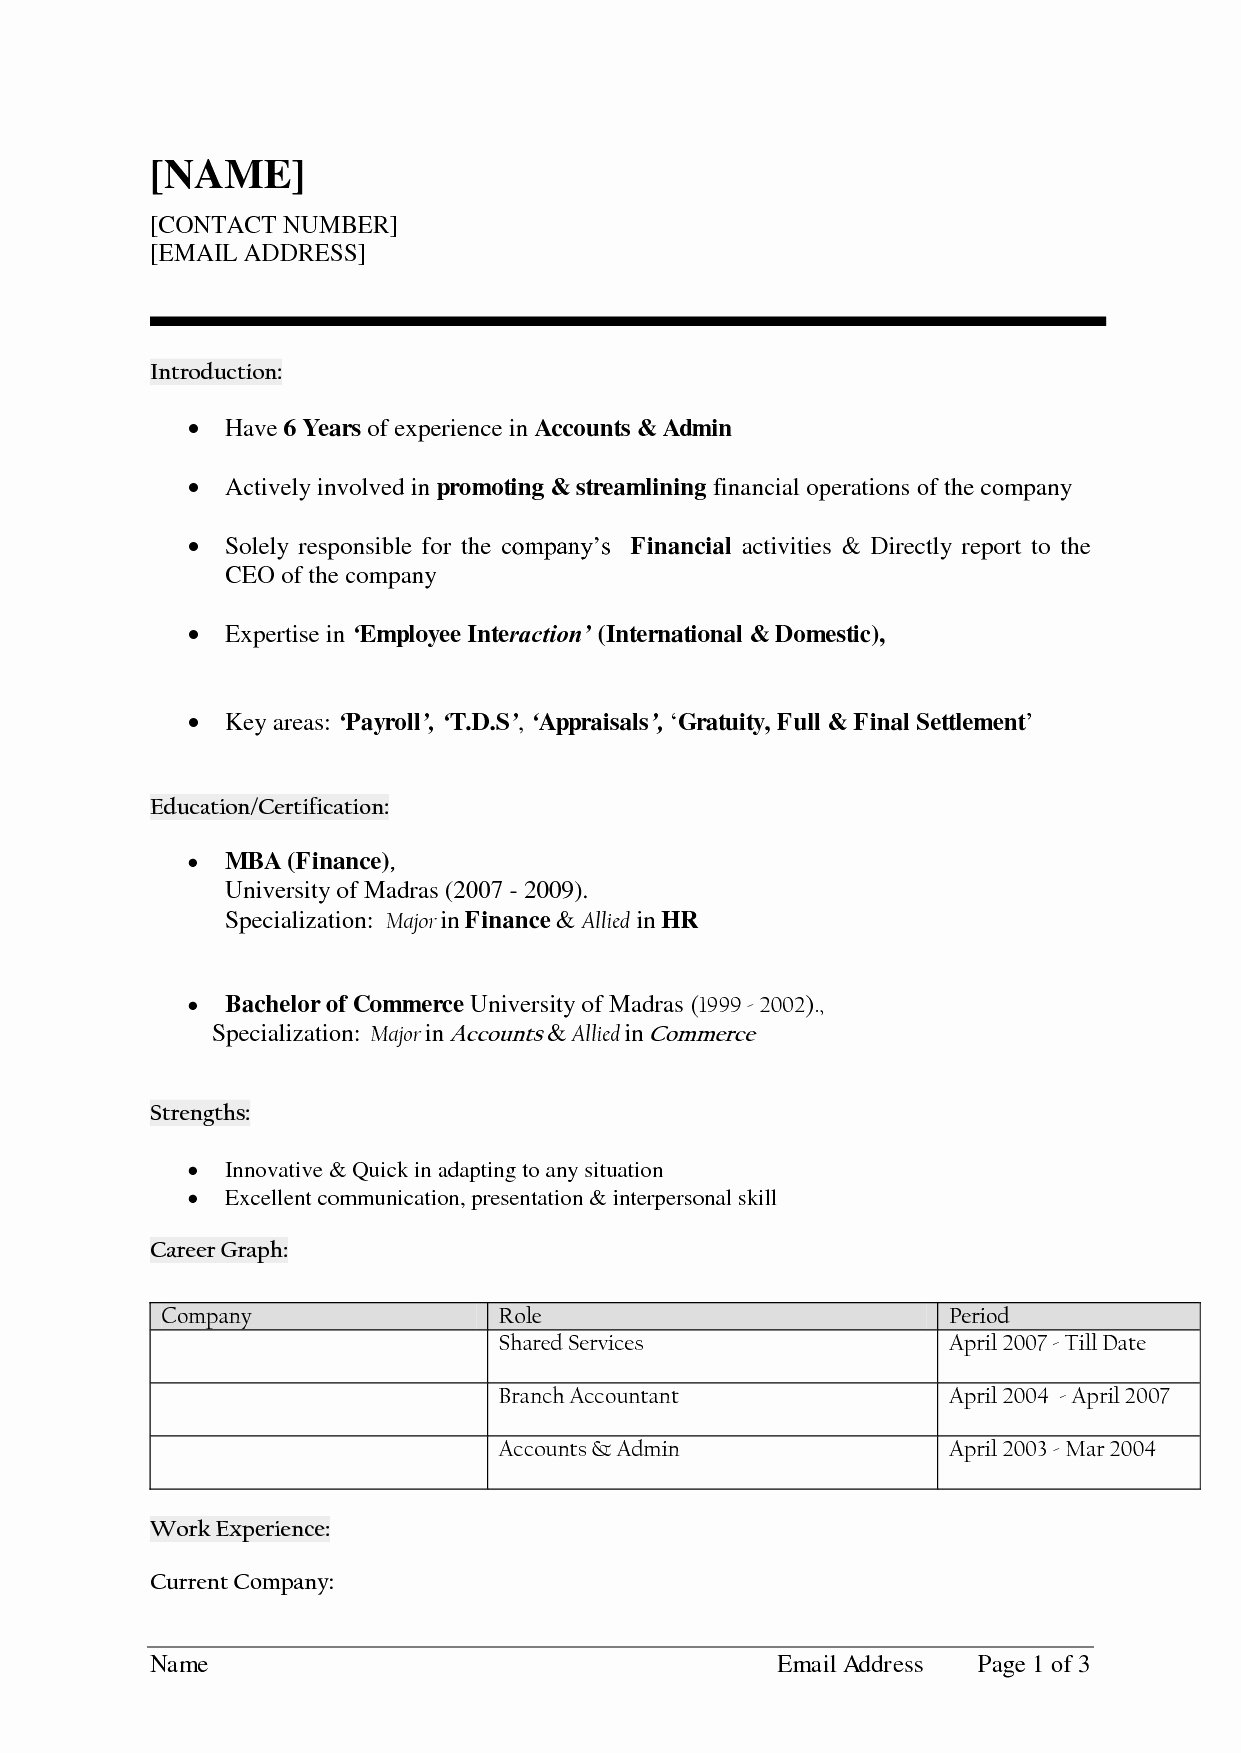 Consulting Proposal Template Mckinsey Lovely Consulting Proposal Template Mckinsey New Secondary School